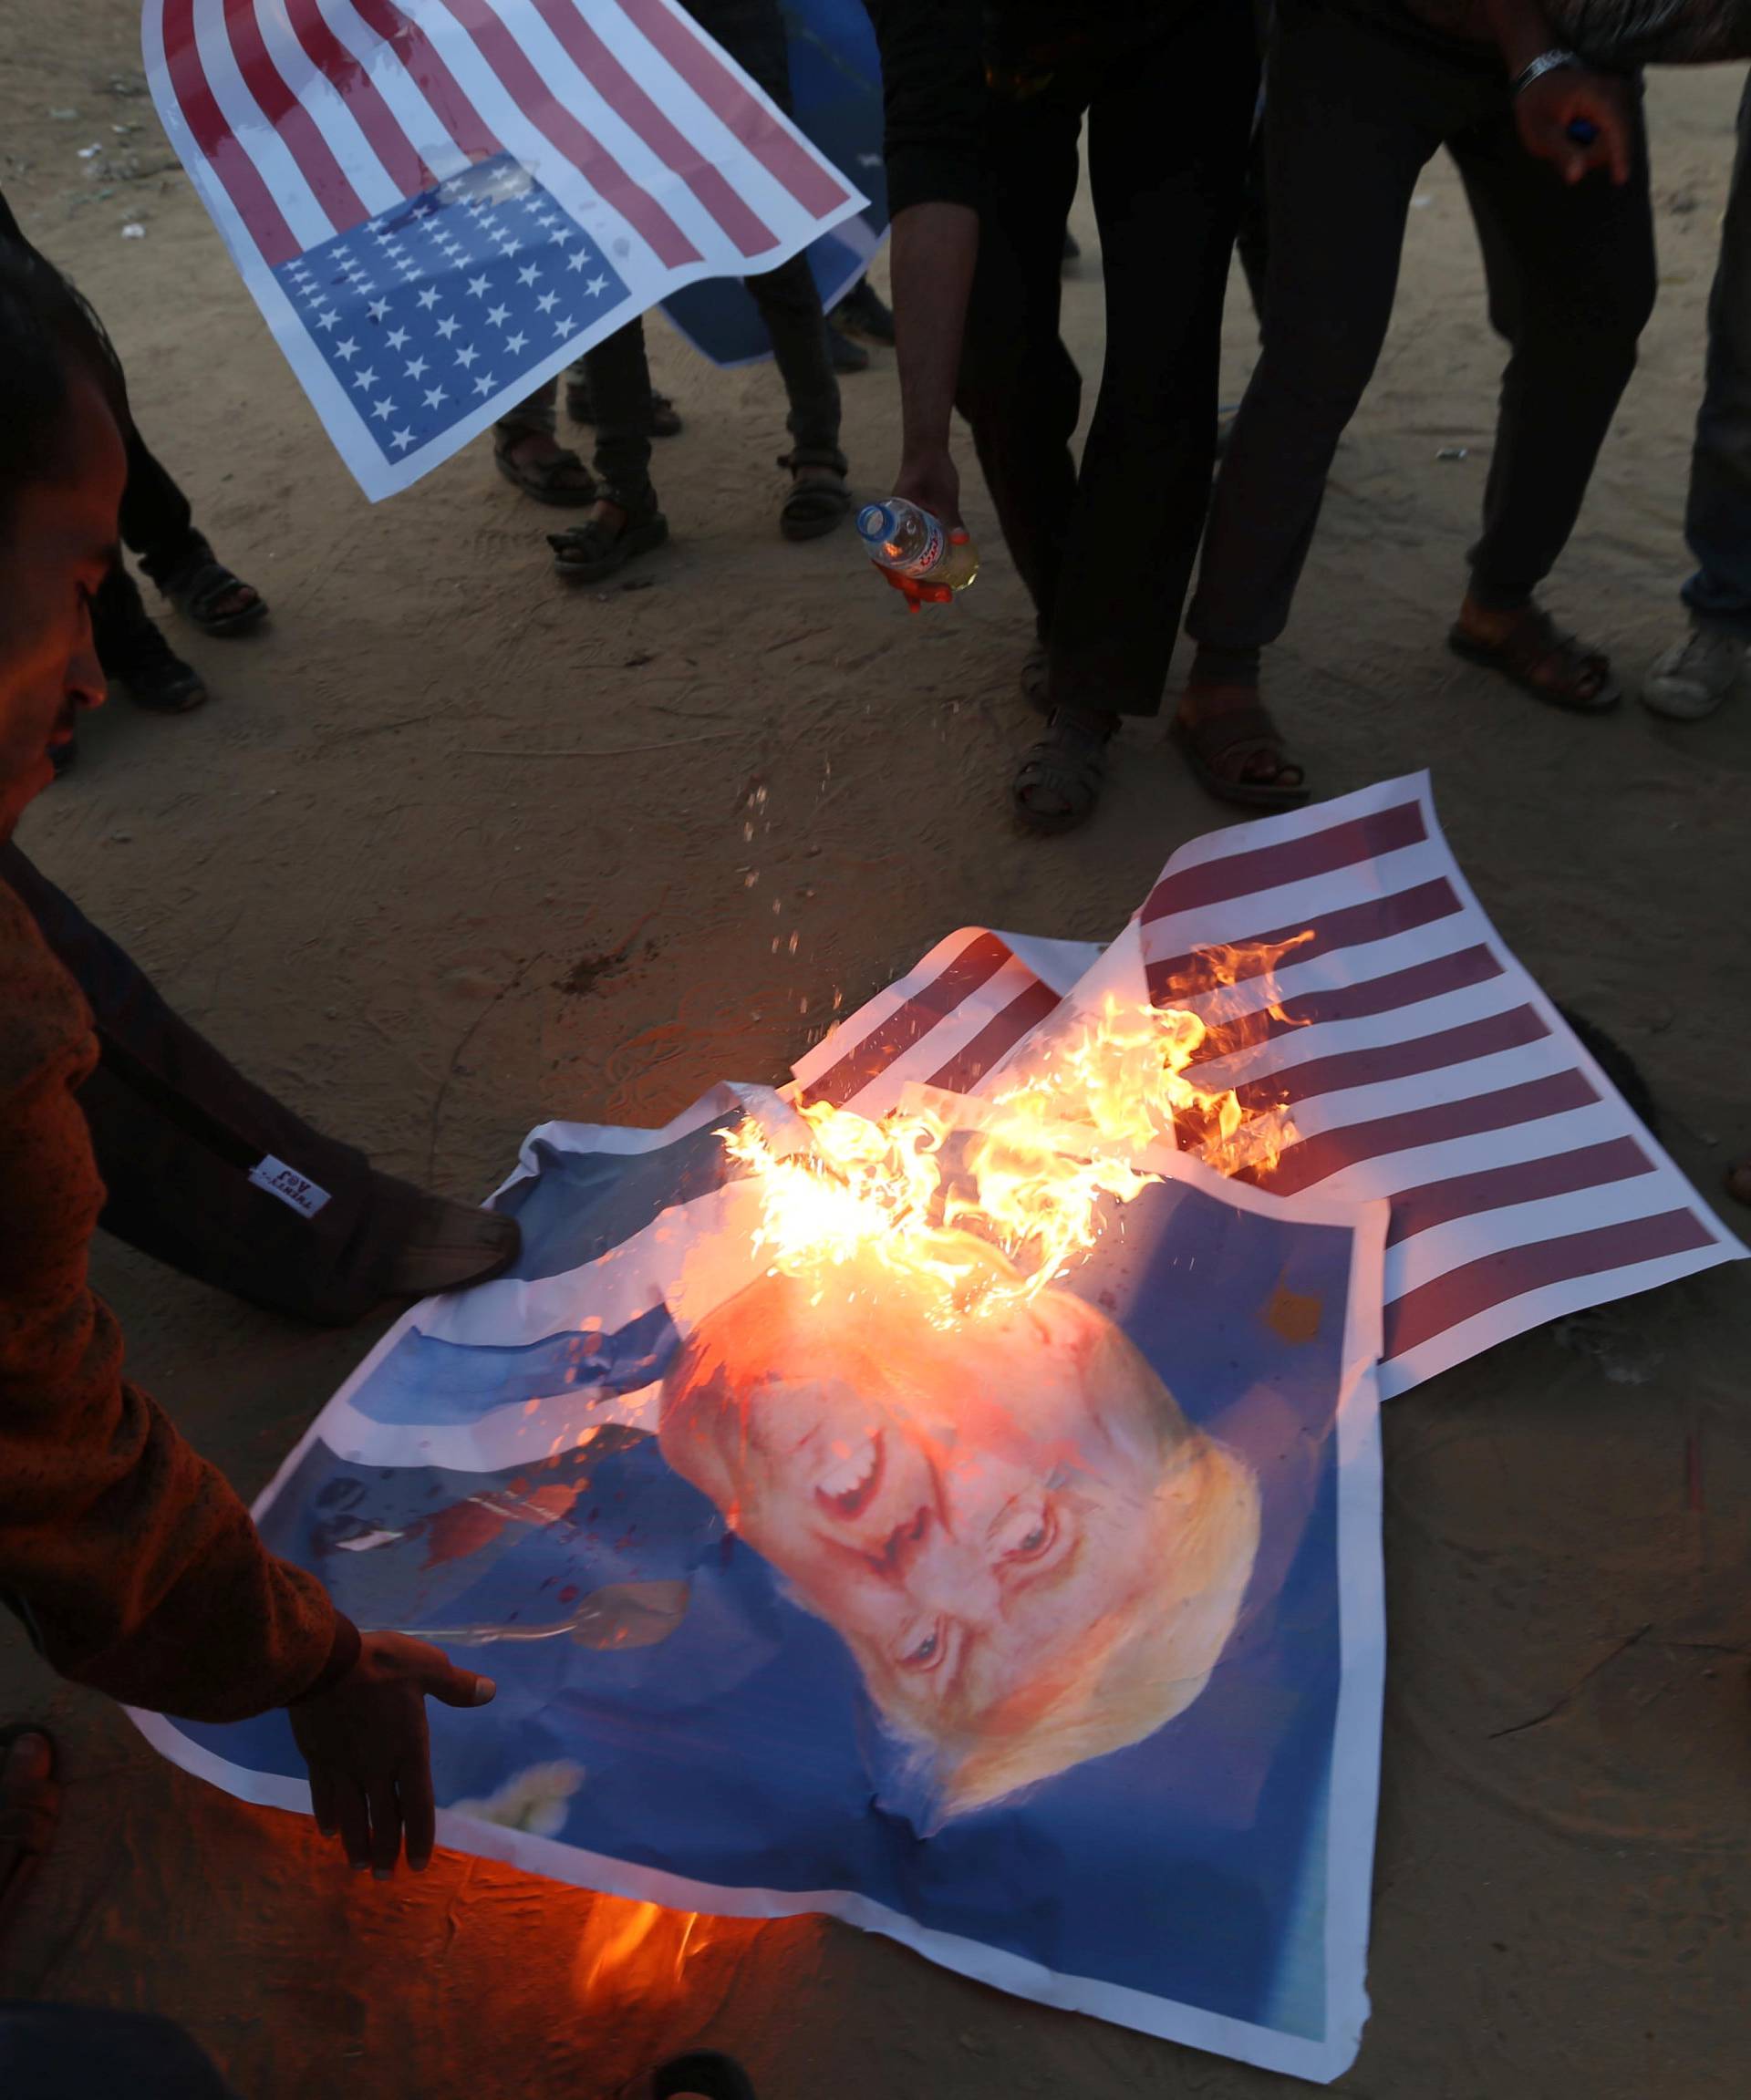 Palestinian demonstrators burn representations of U.S. flags and a poster of U.S. President Trump during a protest, at the Israel-Gaza border in the southern Gaza Strip